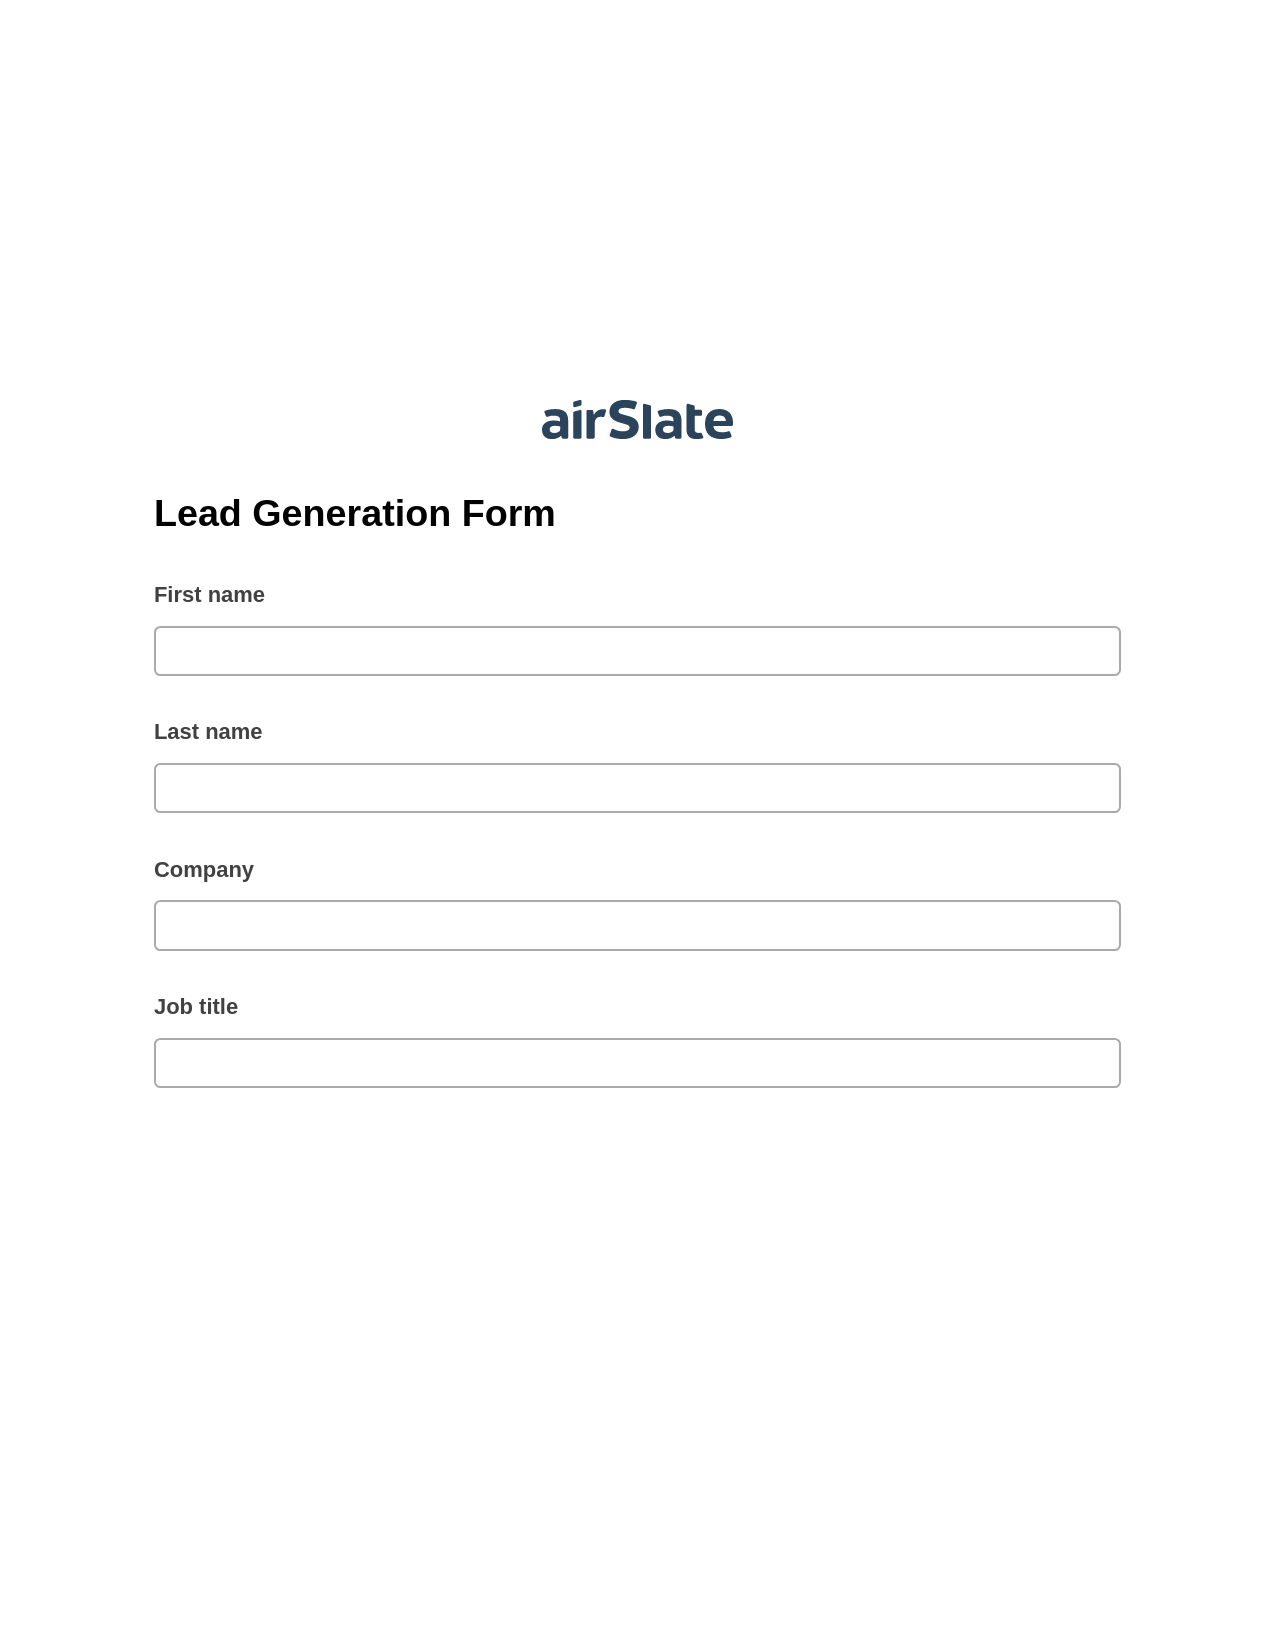 Lead Generation Form Pre-fill from MS Dynamics 365 Records, Google Calendar Bot, Export to Google Sheet Bot